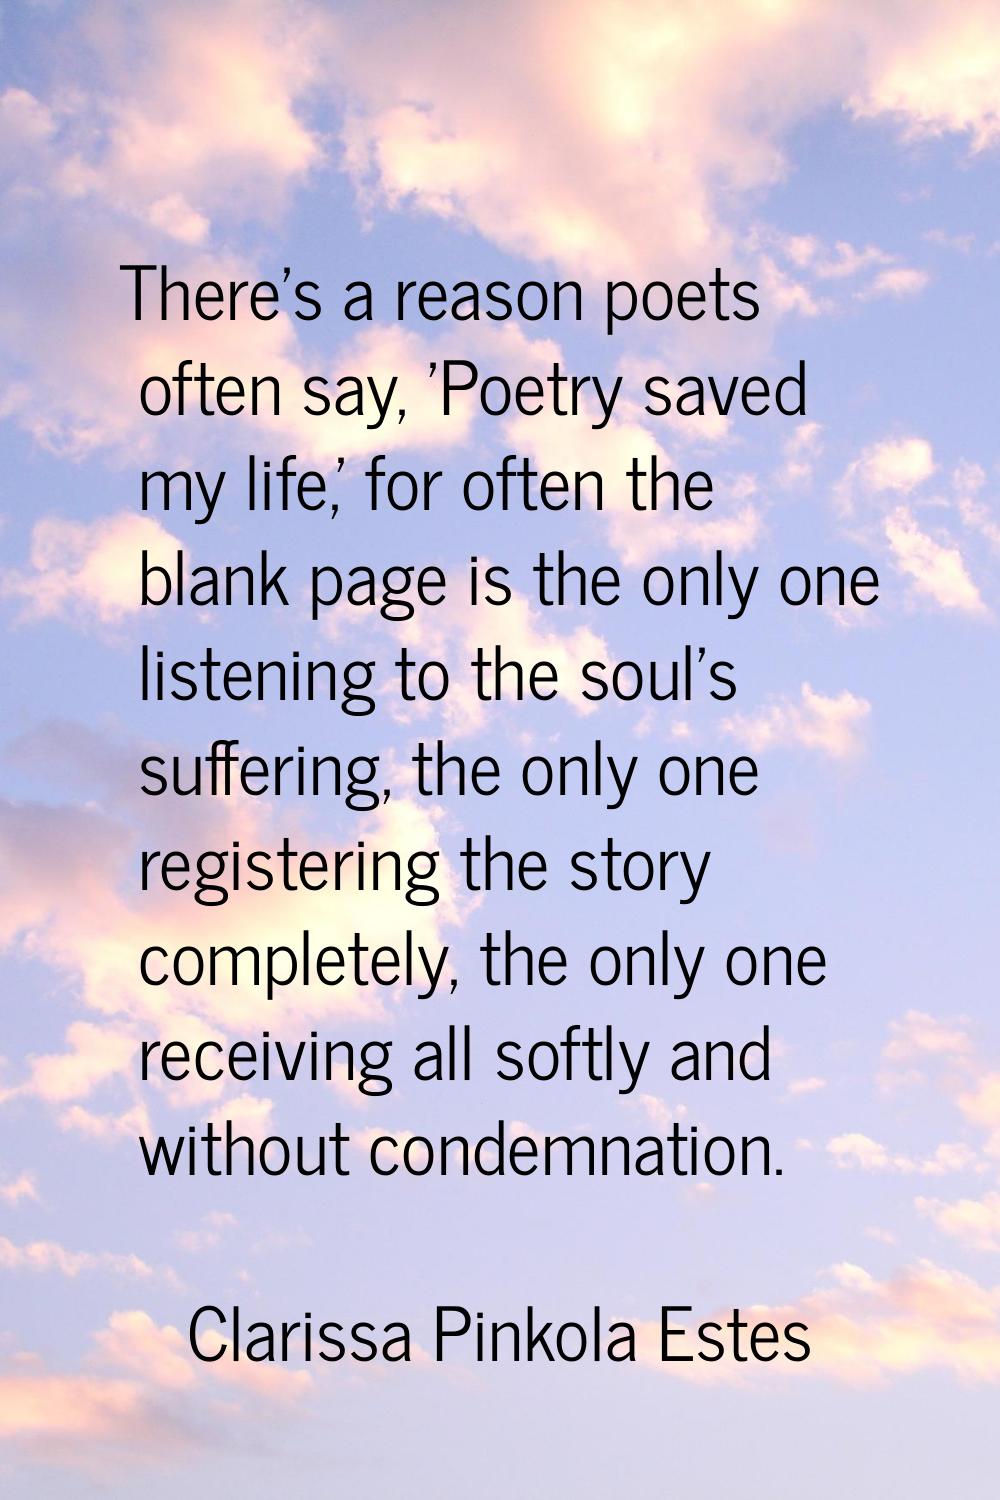 There's a reason poets often say, 'Poetry saved my life,' for often the blank page is the only one 